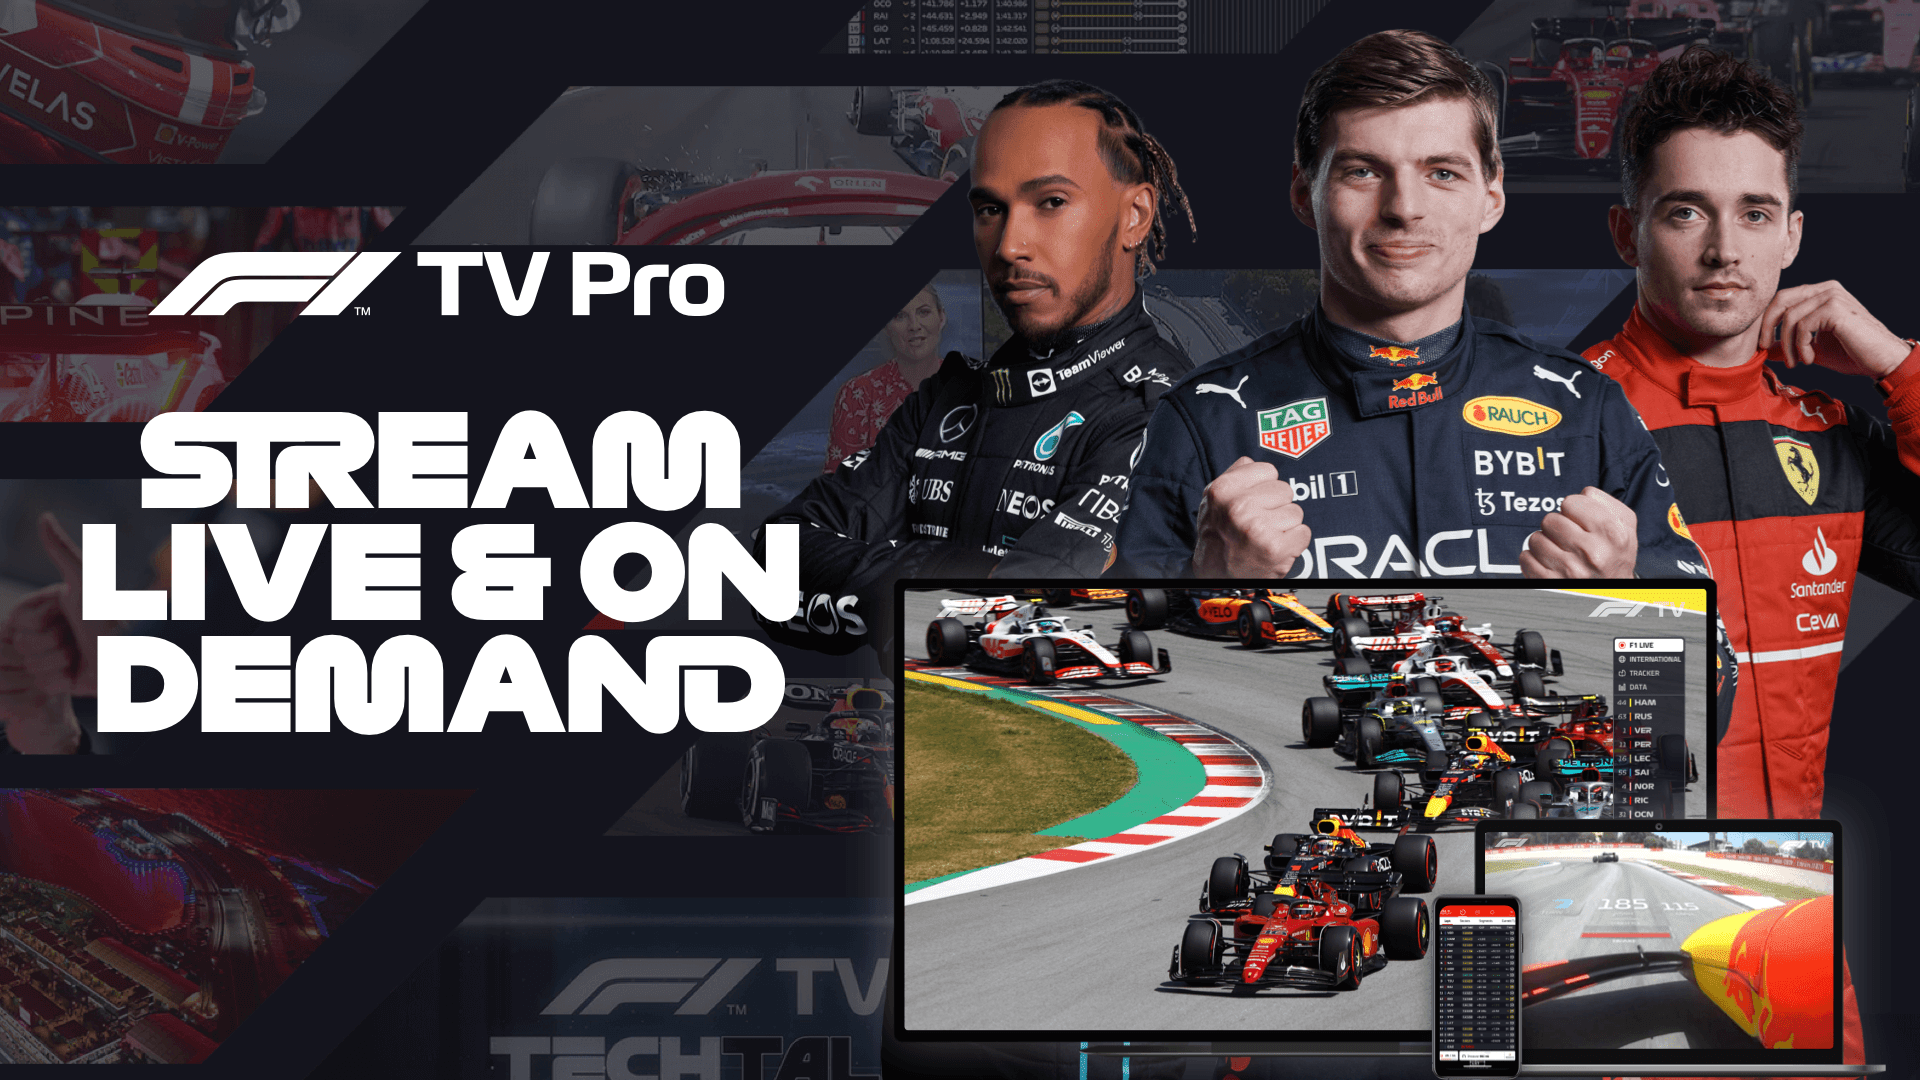 How to stream the 2022 French Grand Prix on F1 TV Pro